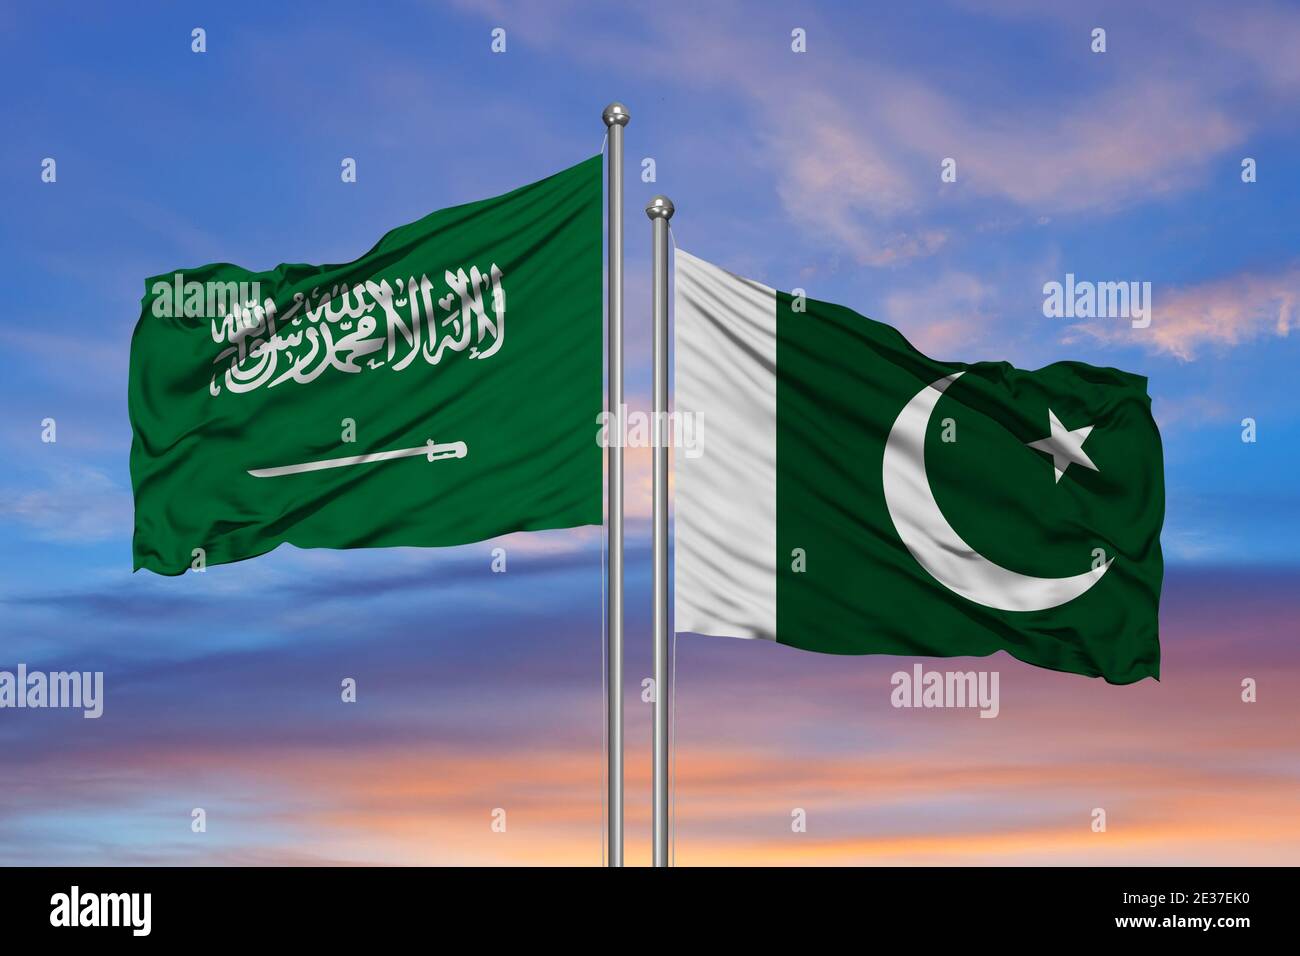 Saudi Arabia and Pakistan, two flags waving against blue sky. 3d image Stock Photo